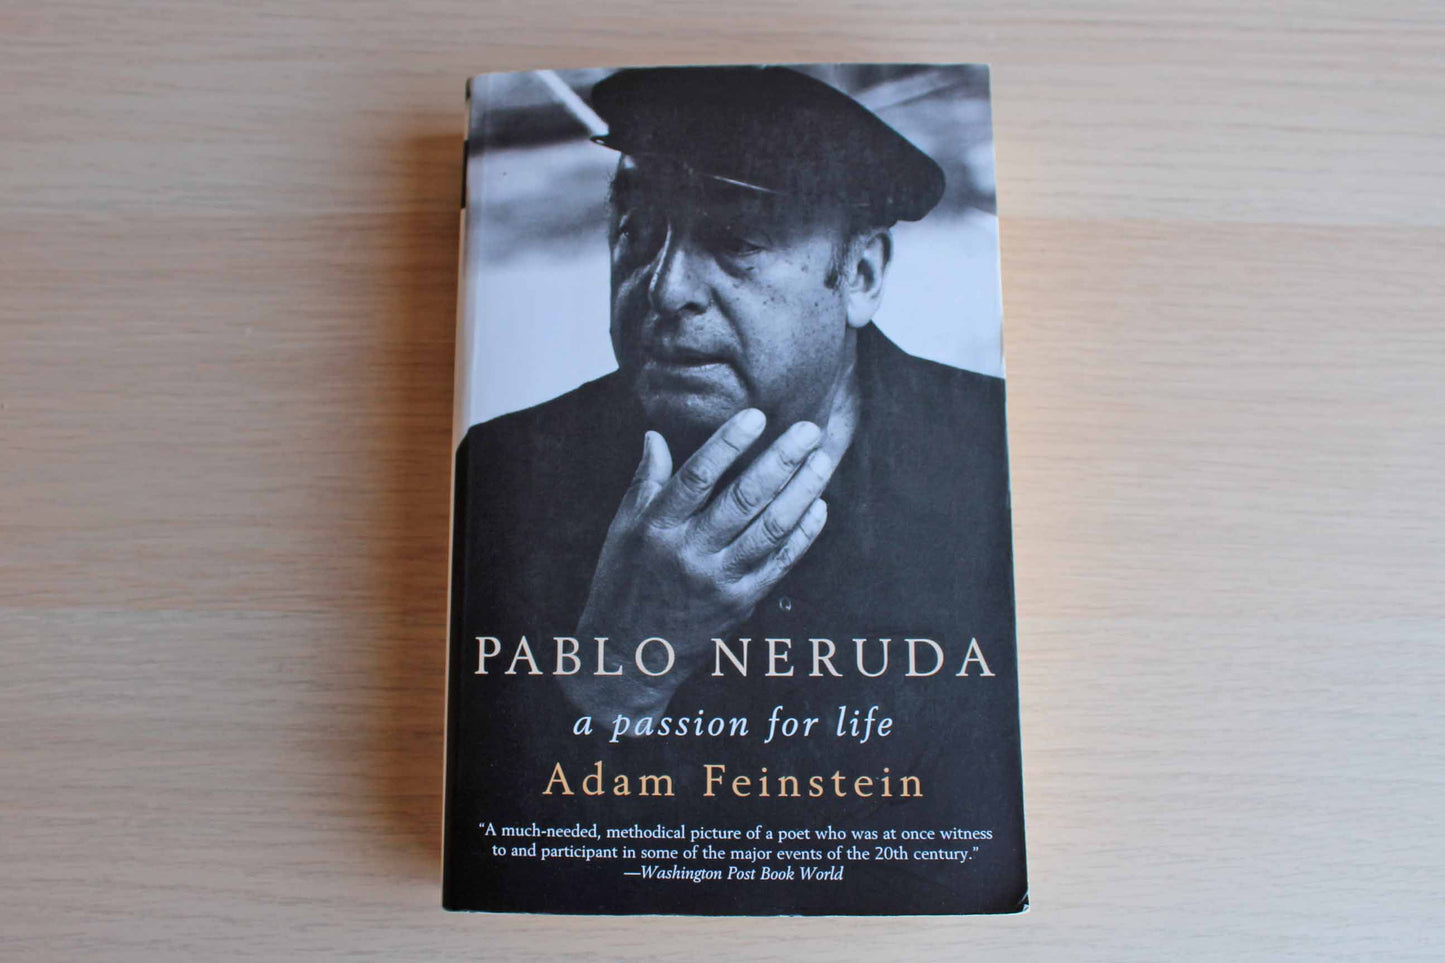 Pablo Neruda:  A Passion for Life by Adam Feinstein